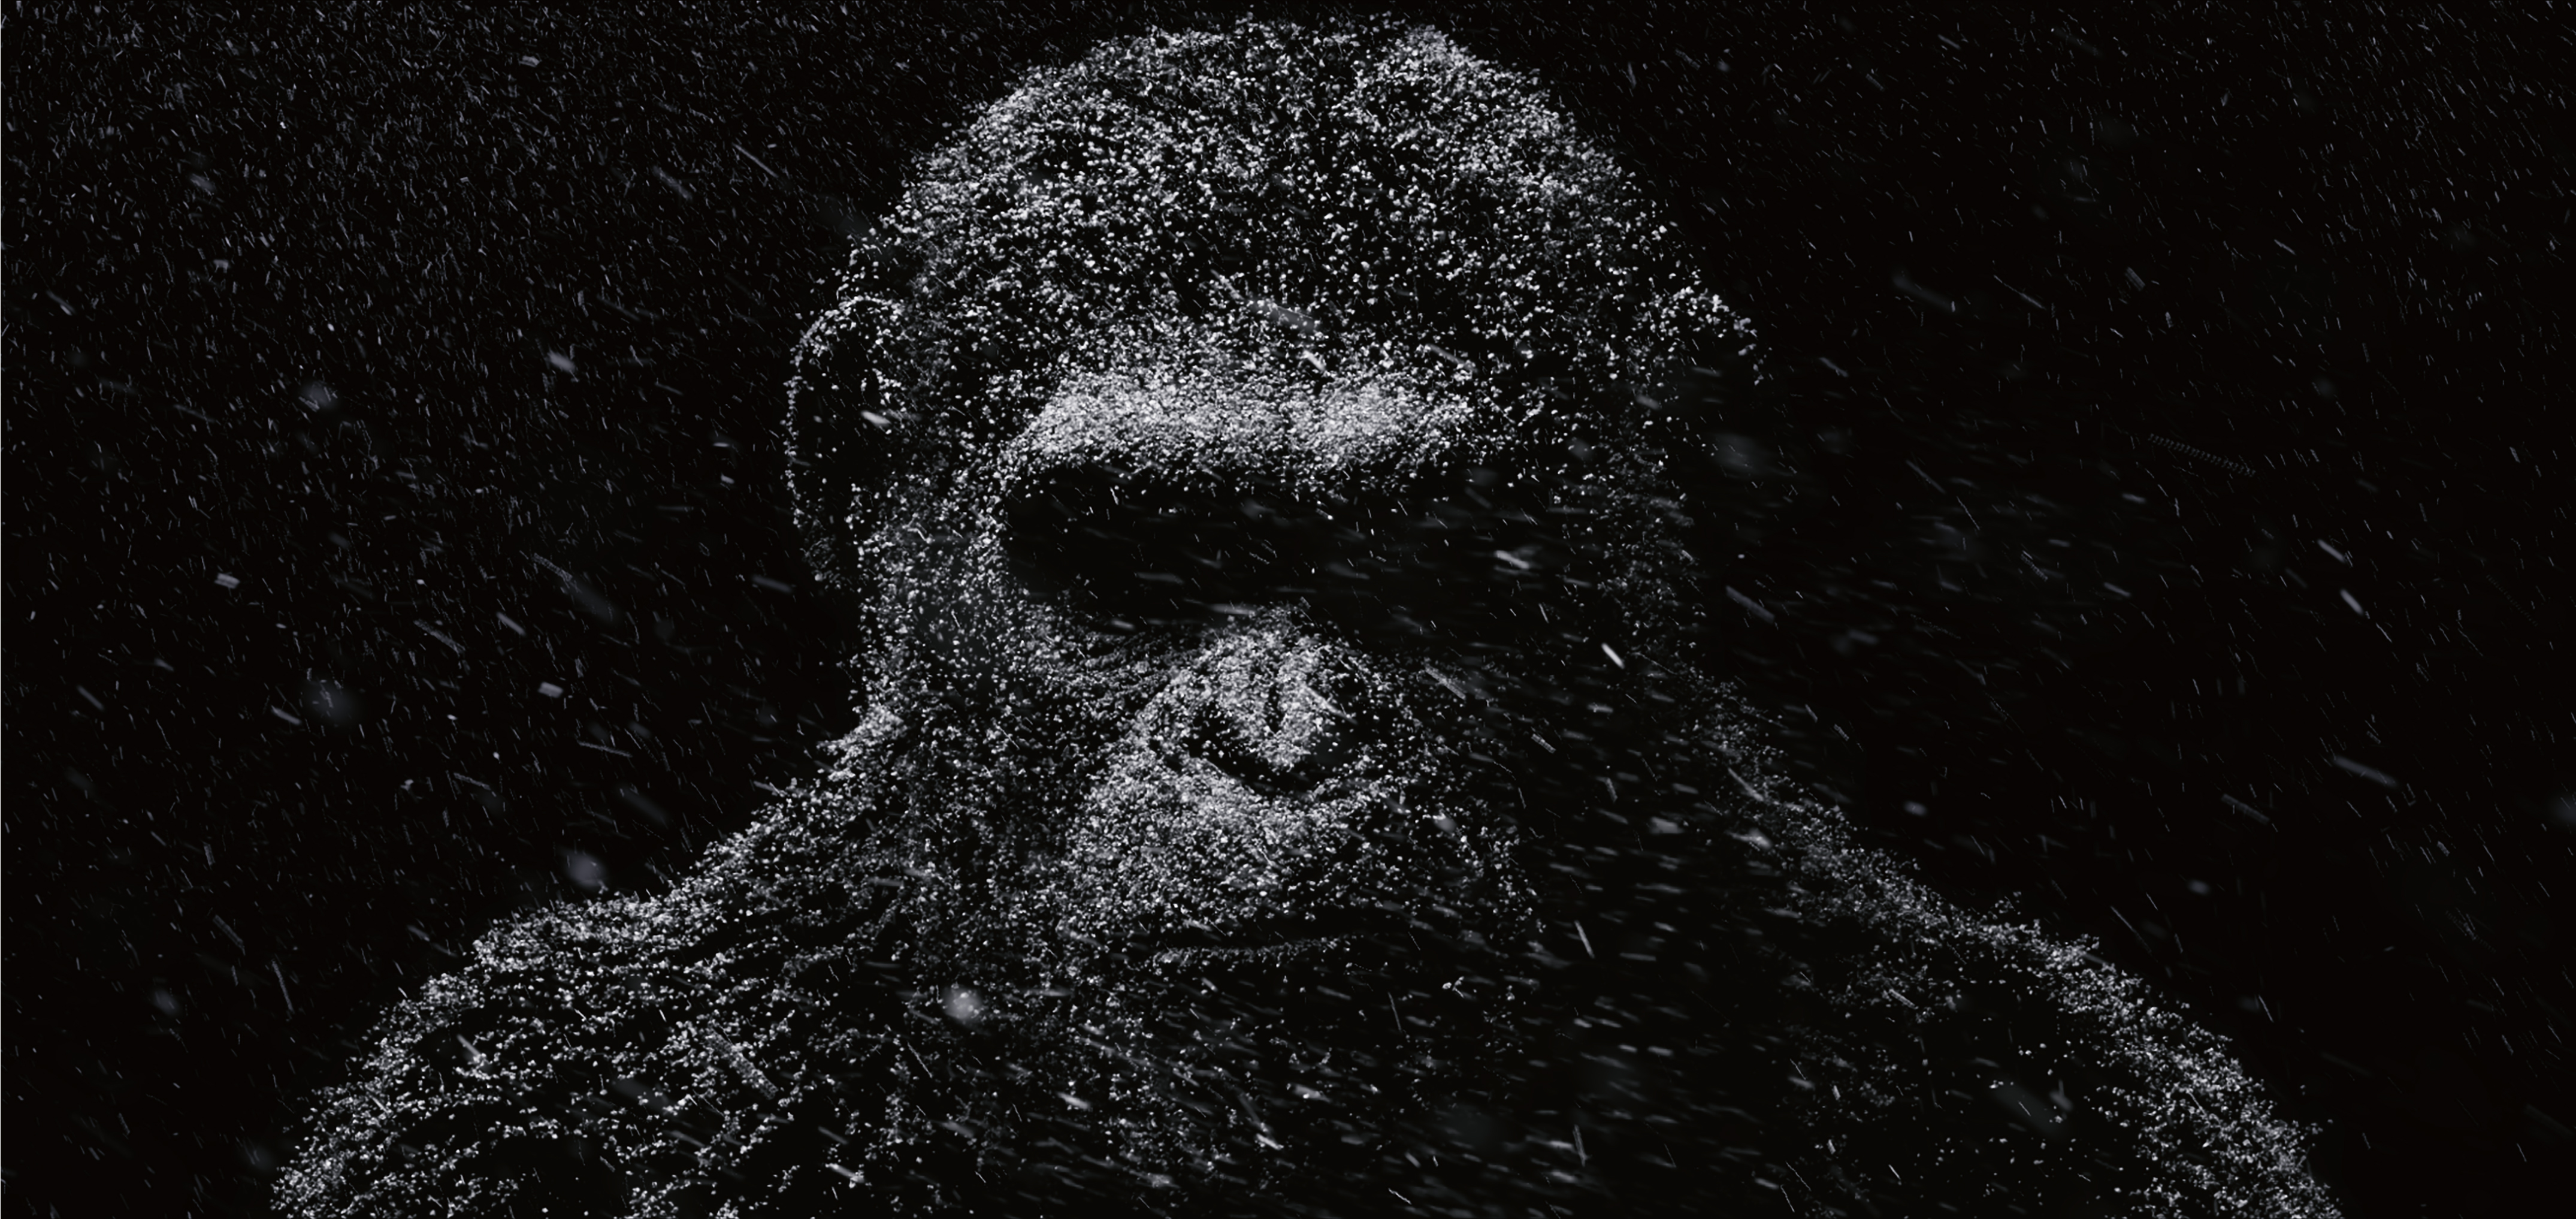 Movie War For The Planet Of The Apes HD Wallpaper | Background Image